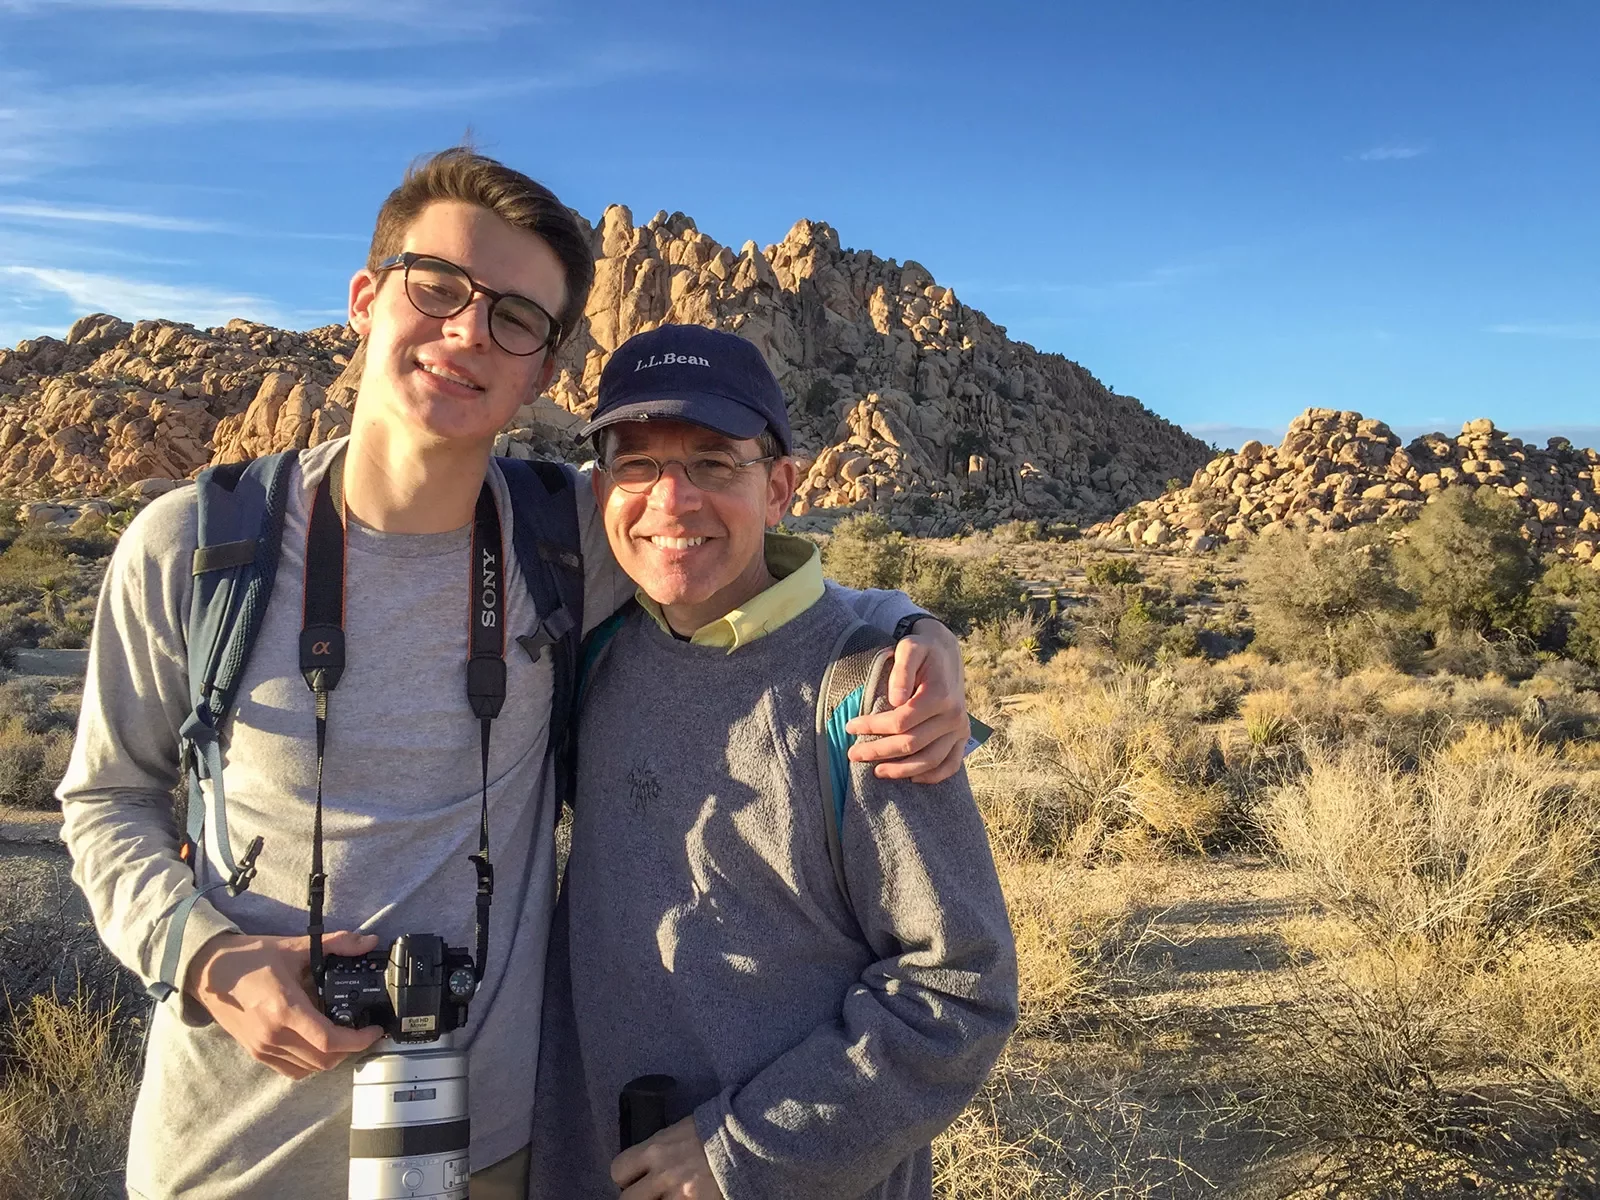 Two guests posing for desert photo, one has a camera.